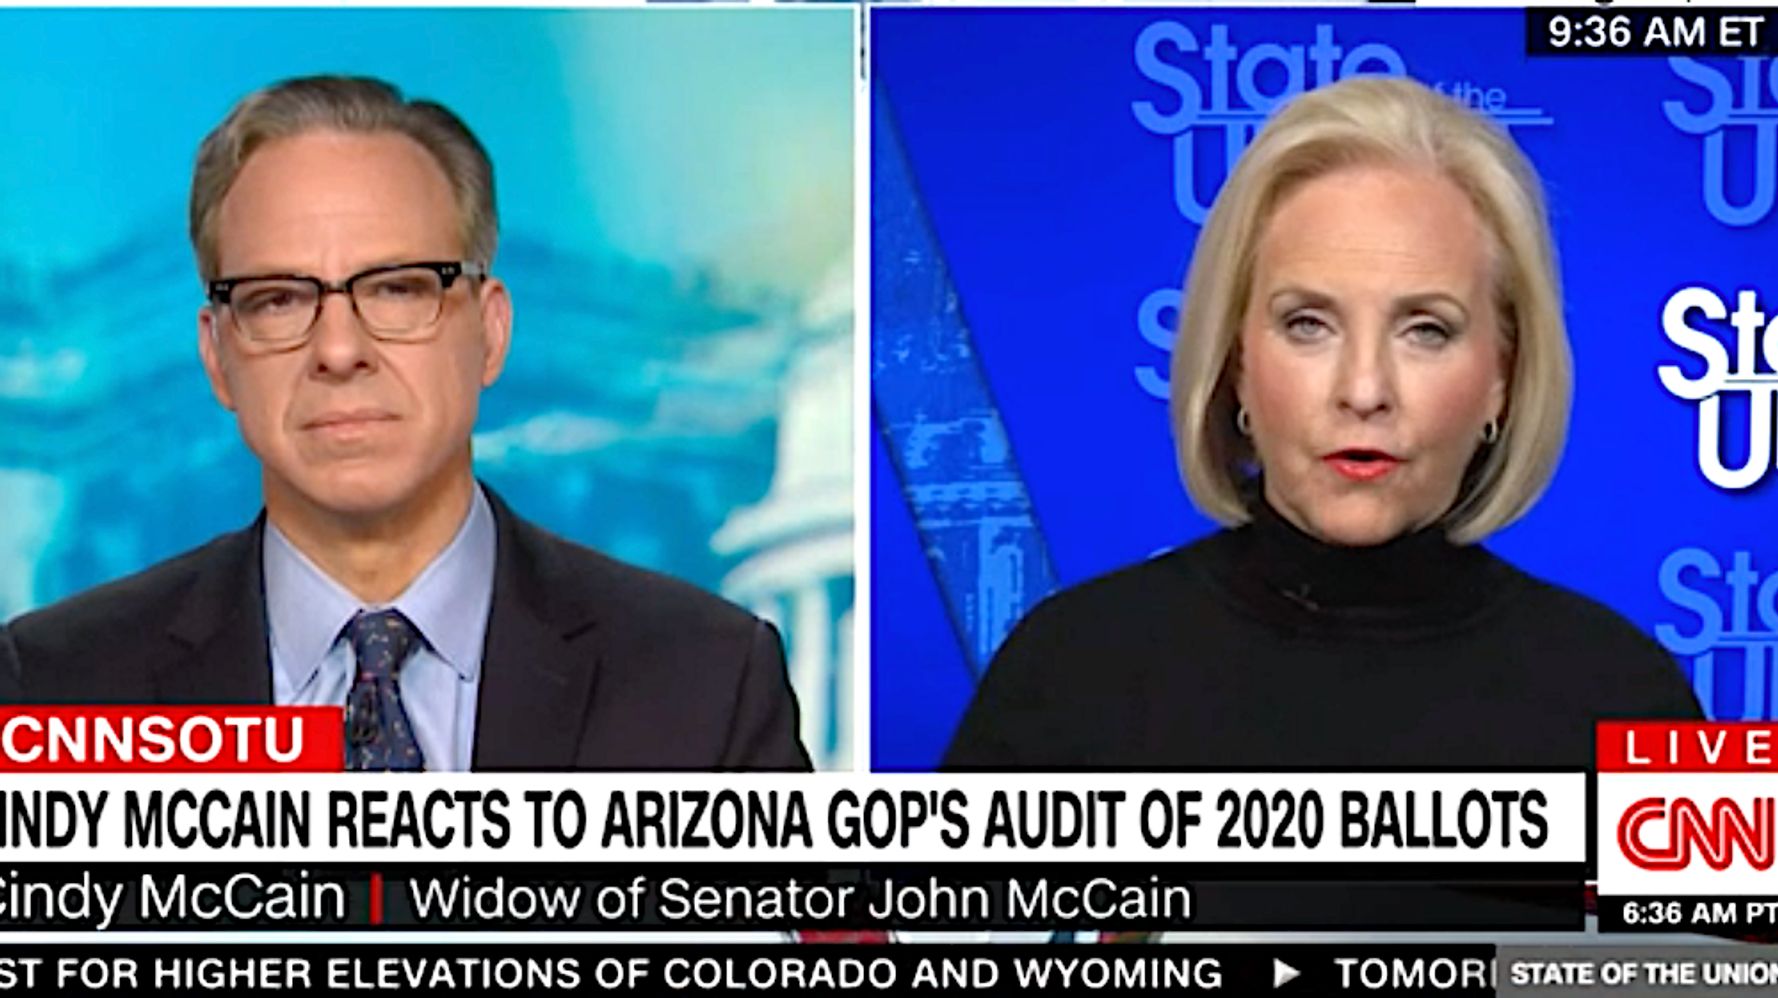 Cindy McCain Rips 'Ludicrous' Arizona Recount: 'The Election Is Over'